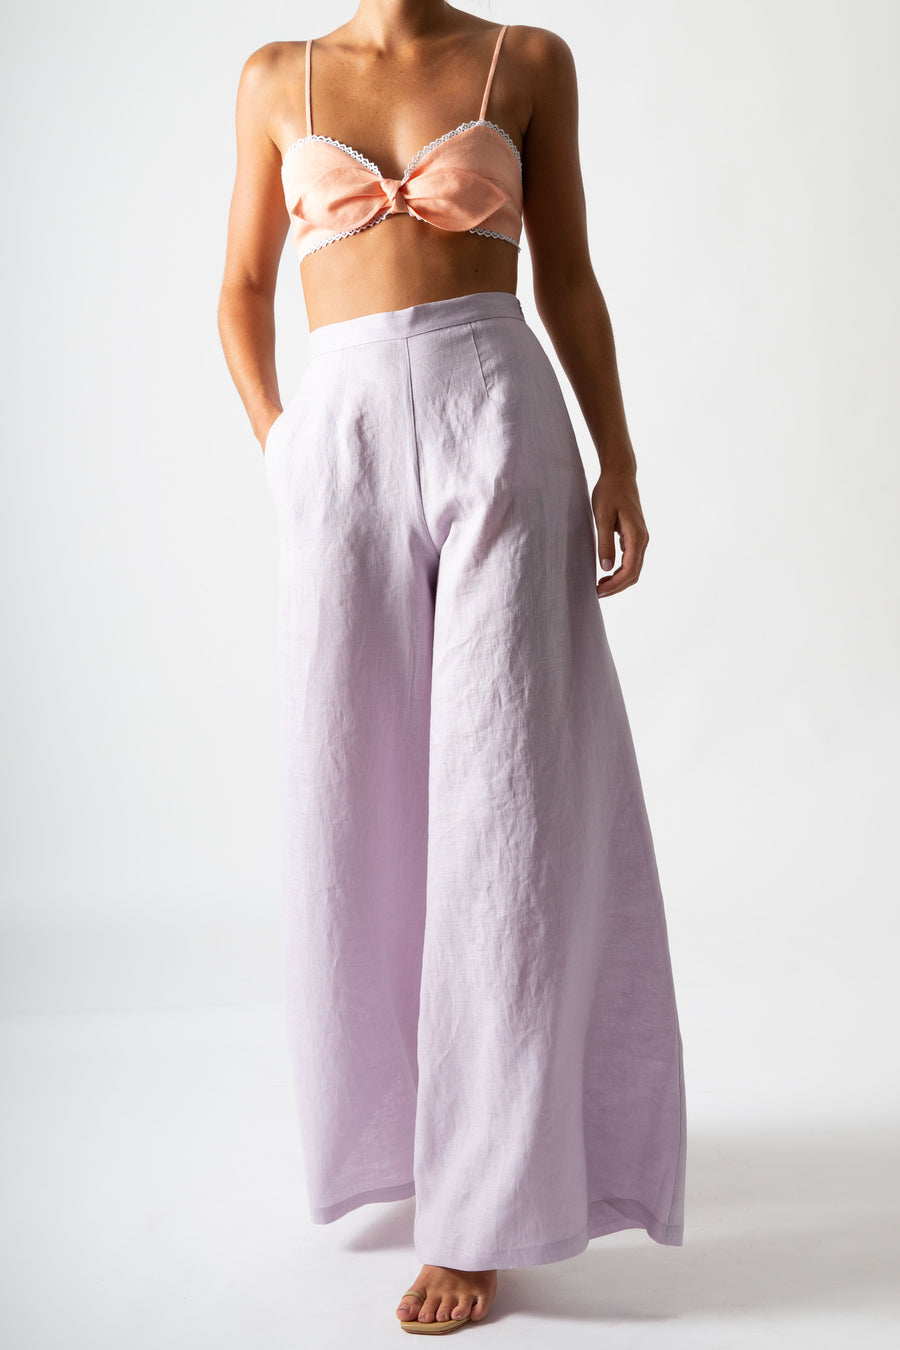 This is an image of a woman wearing a sorbet colored bralette with lavander wide legged pants.